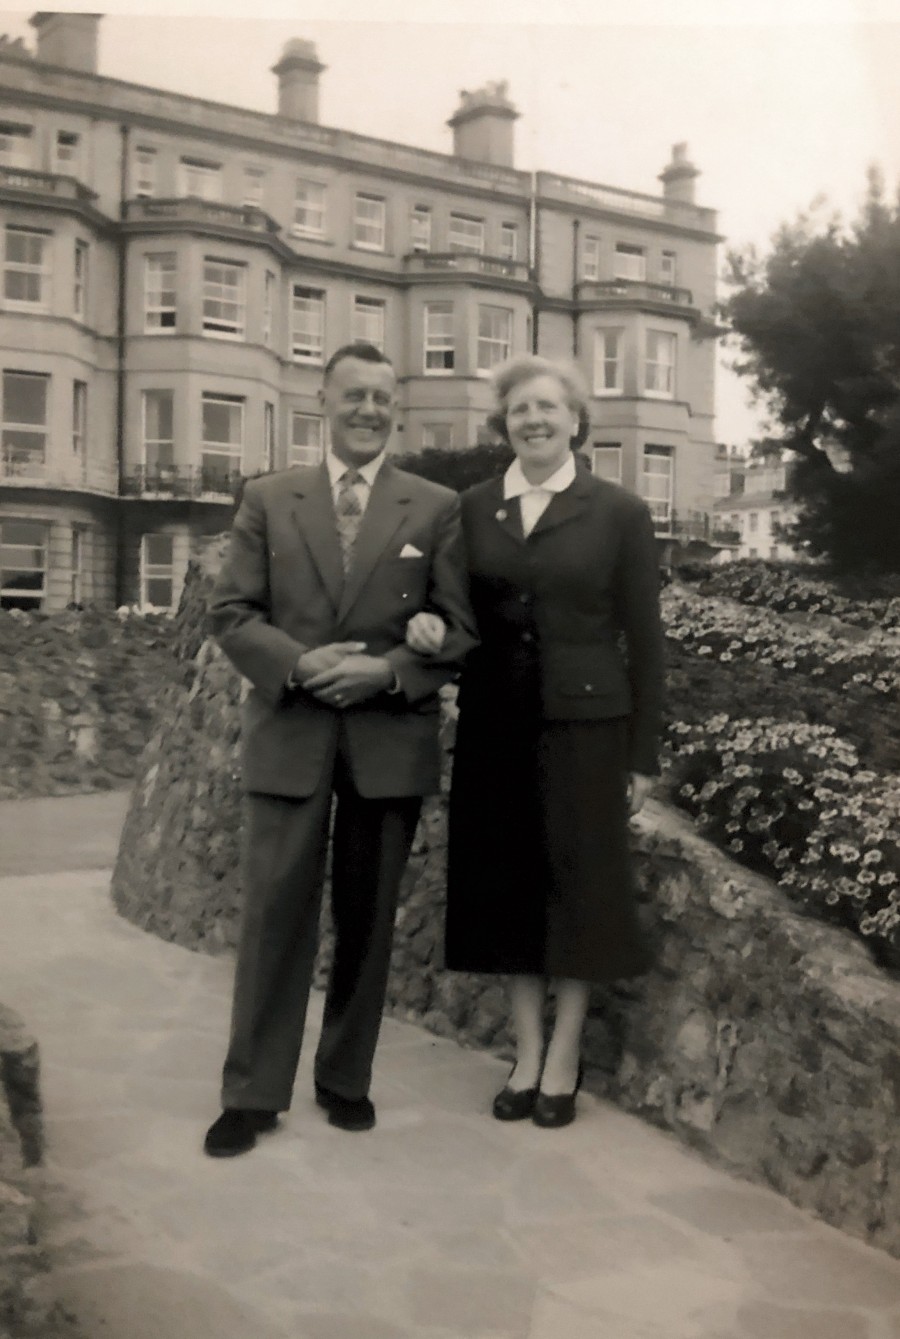 The happy couple on holiday somewhere in the U.K. Uncle Albert and Auntie Maureen were very nice people and I was always happy when in their company. They lived in Mousehole, Cornwall for a while. The last time I saw them they lived in Cheadle. 